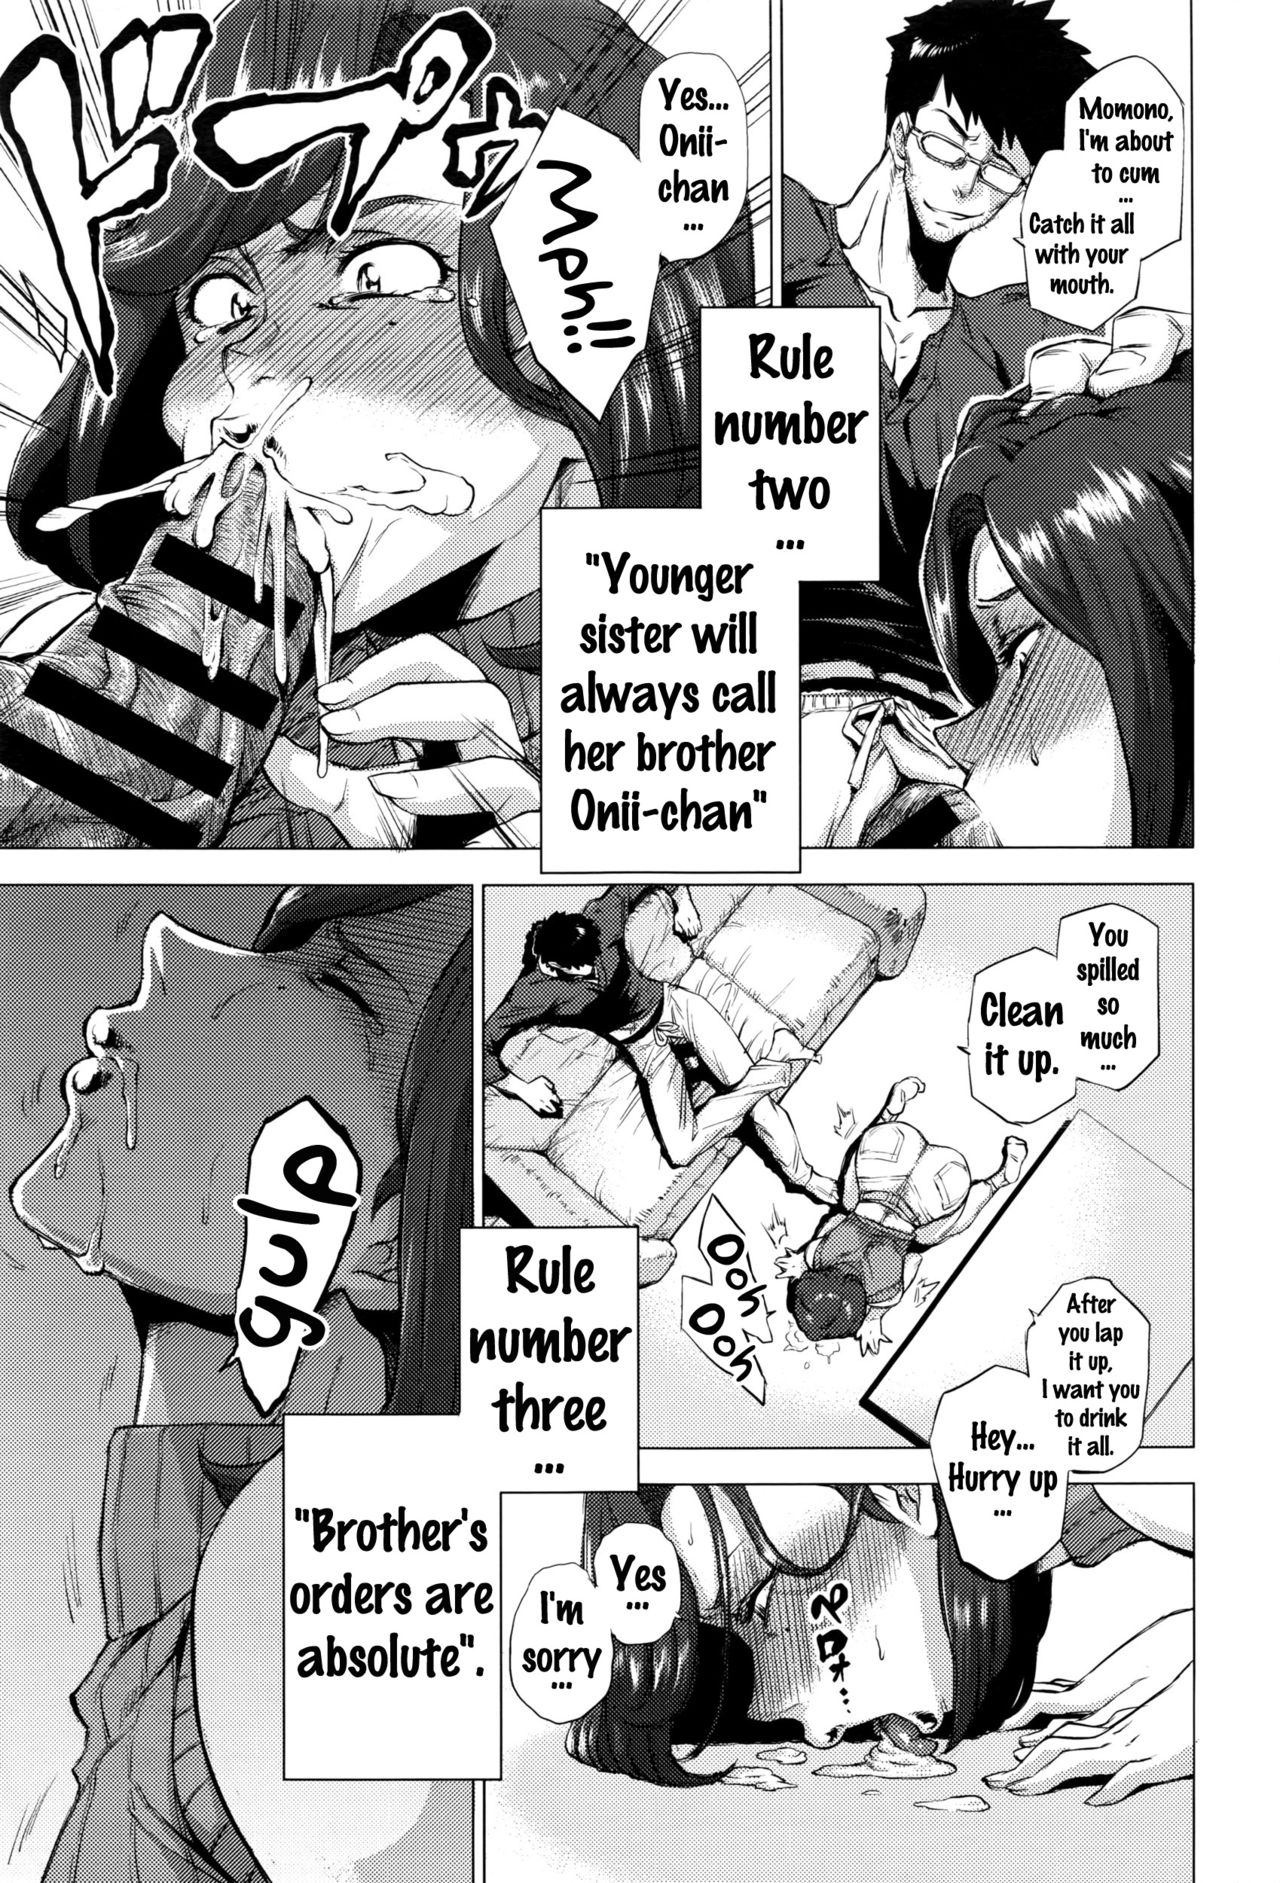 [Etsuzan Jakusui] Imouto Rule | Three Rules of a Younger Sister (COMIC Anthurium 2016-09) [English] {doujins.com} [越山弱衰] 妹三原則 (COMIC アンスリウム 2016年9月号) [英訳]